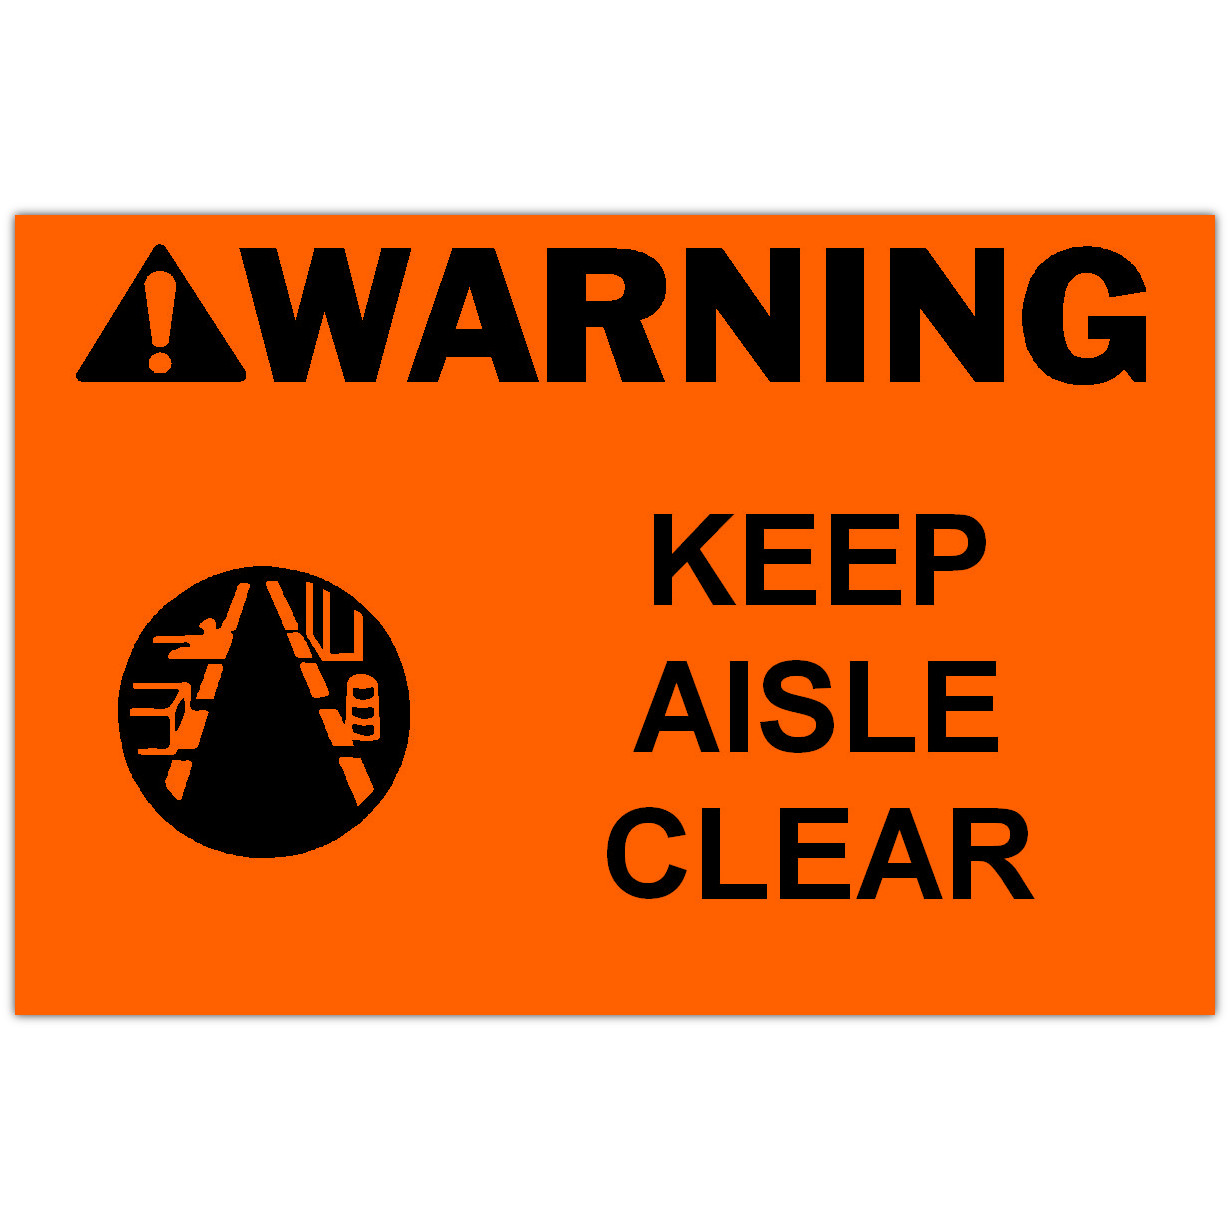 Detail view for 4" x 6" WARNING Keep Aisle Clear Safety Label